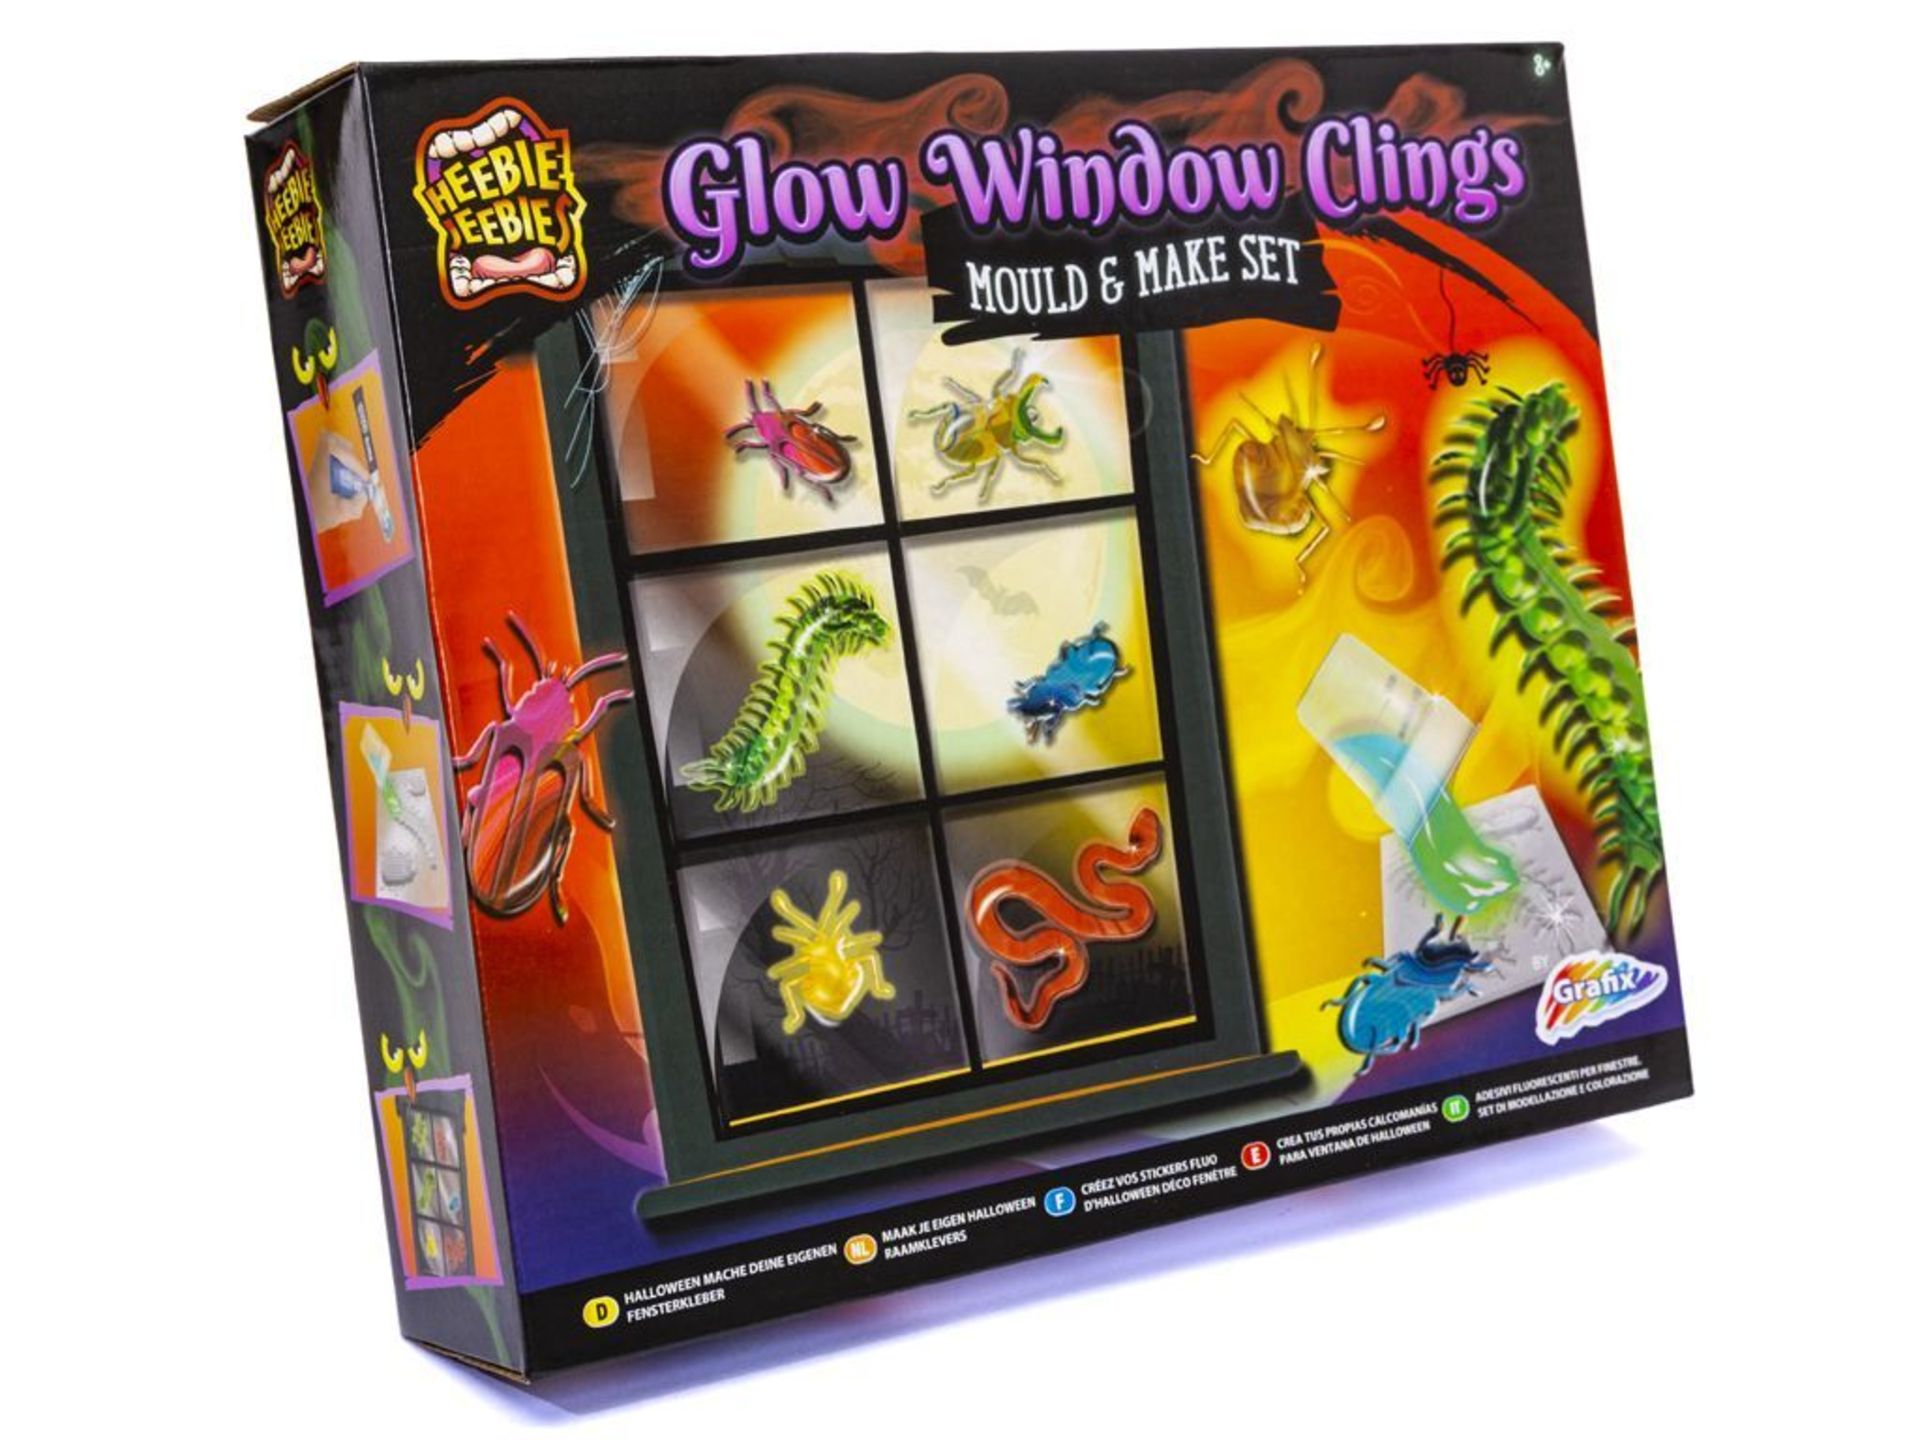 GRAFIX GLOW WINDOW CLING MOULD & MAKE SET INCLUDES 3 COLOURED GELS, 3 CLING SOLUTIONS, 3 MOULD